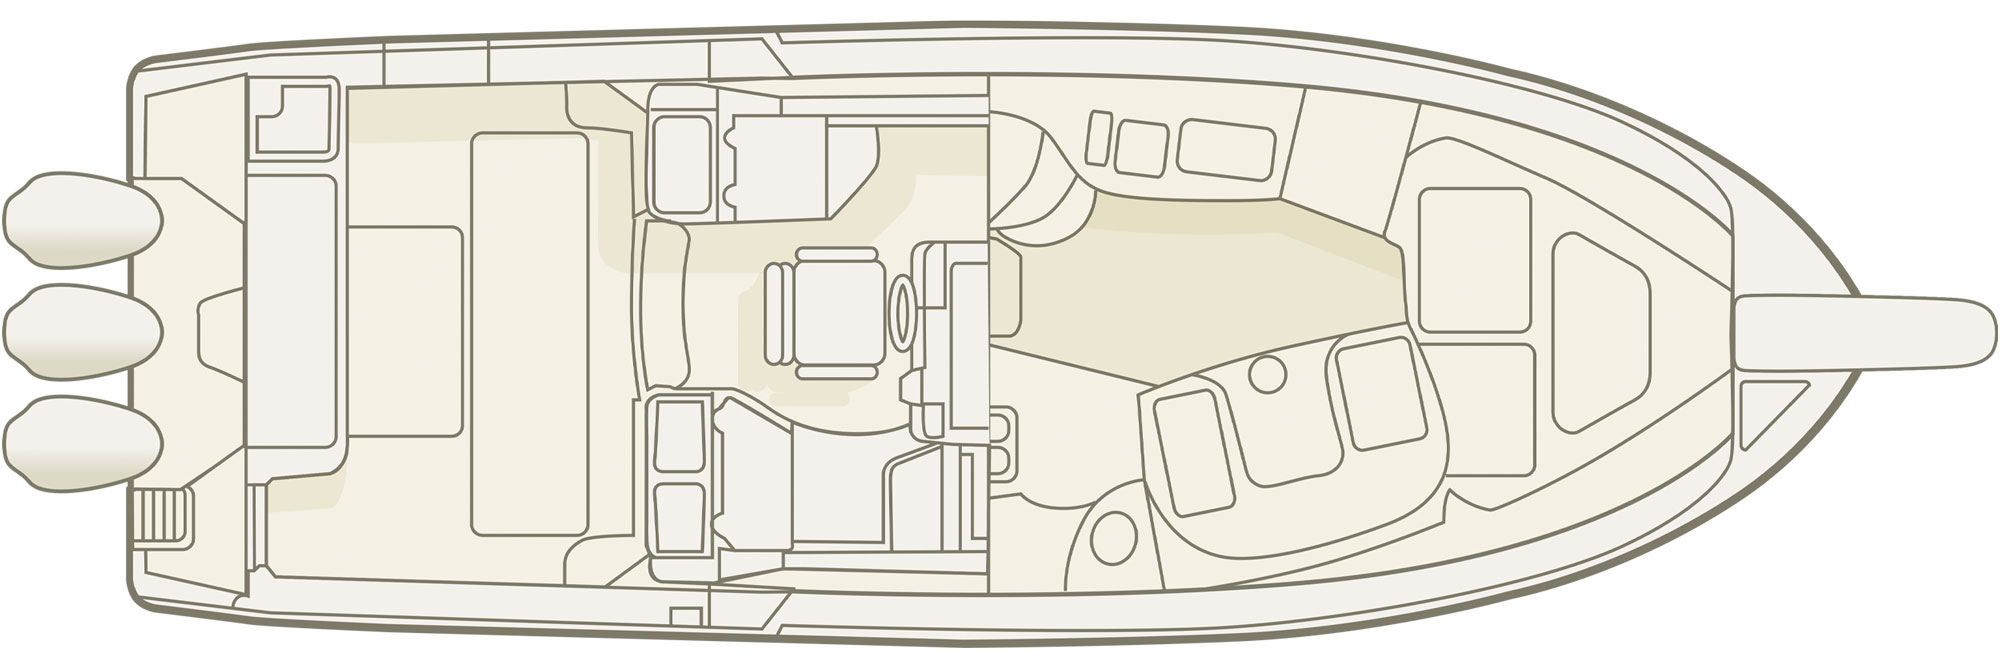 Express 370 Grady White 37 Foot Express Cabin Overhead Drawing